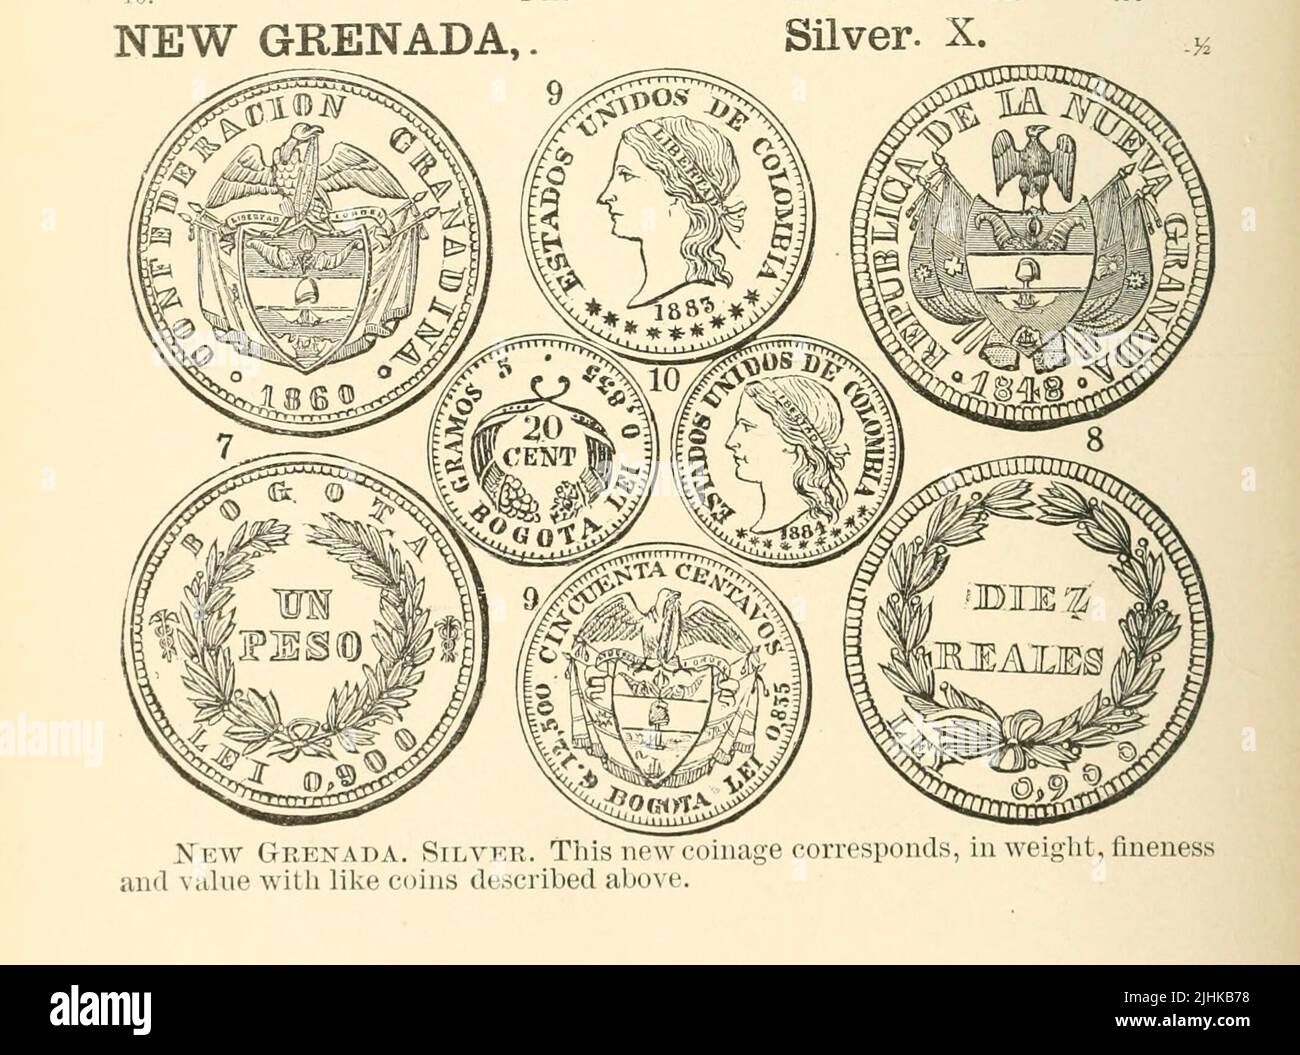 New Grenada Coins from the book Illustrated encyclopaedia of gold and silver coins of the world; illustrating the modern, ancient, current and curious, from A.D. 1885 back to B.C. 700 by Andrew Madsen Smith, Publication date 1886 Stock Photo